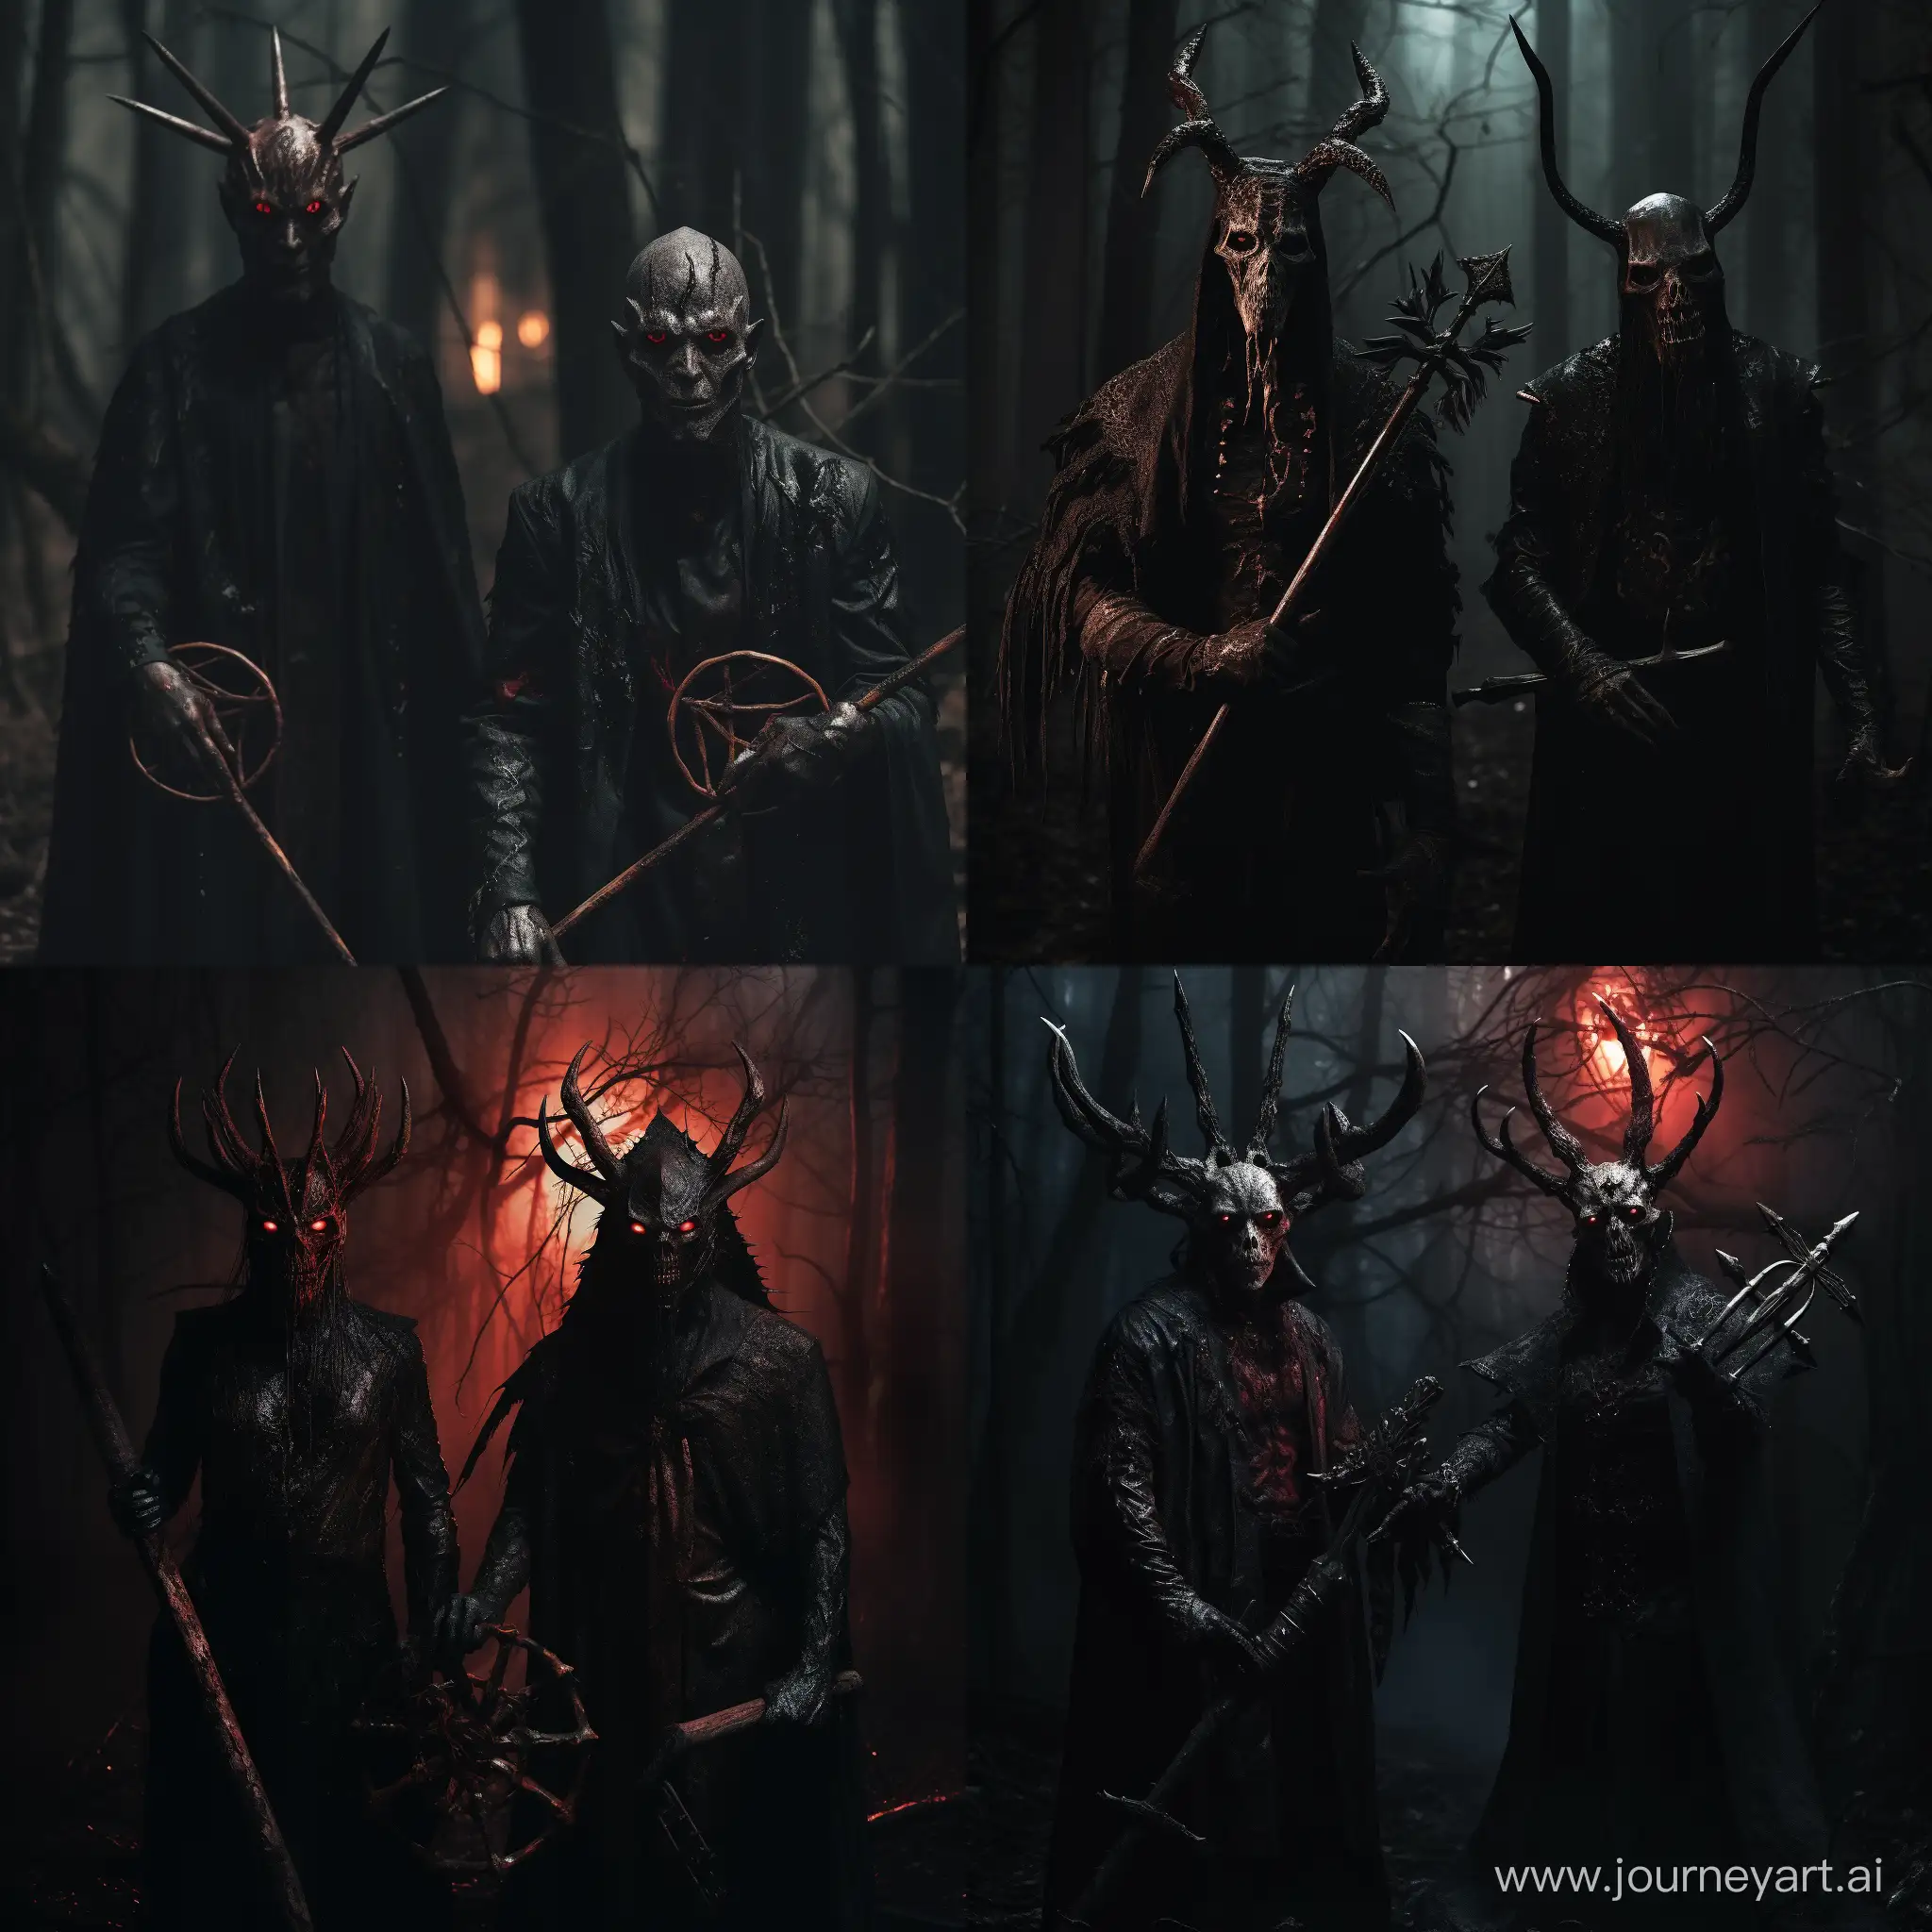 Sinister-Demonic-Duo-Wielding-Mystic-Weapons-in-Enchanted-Forest